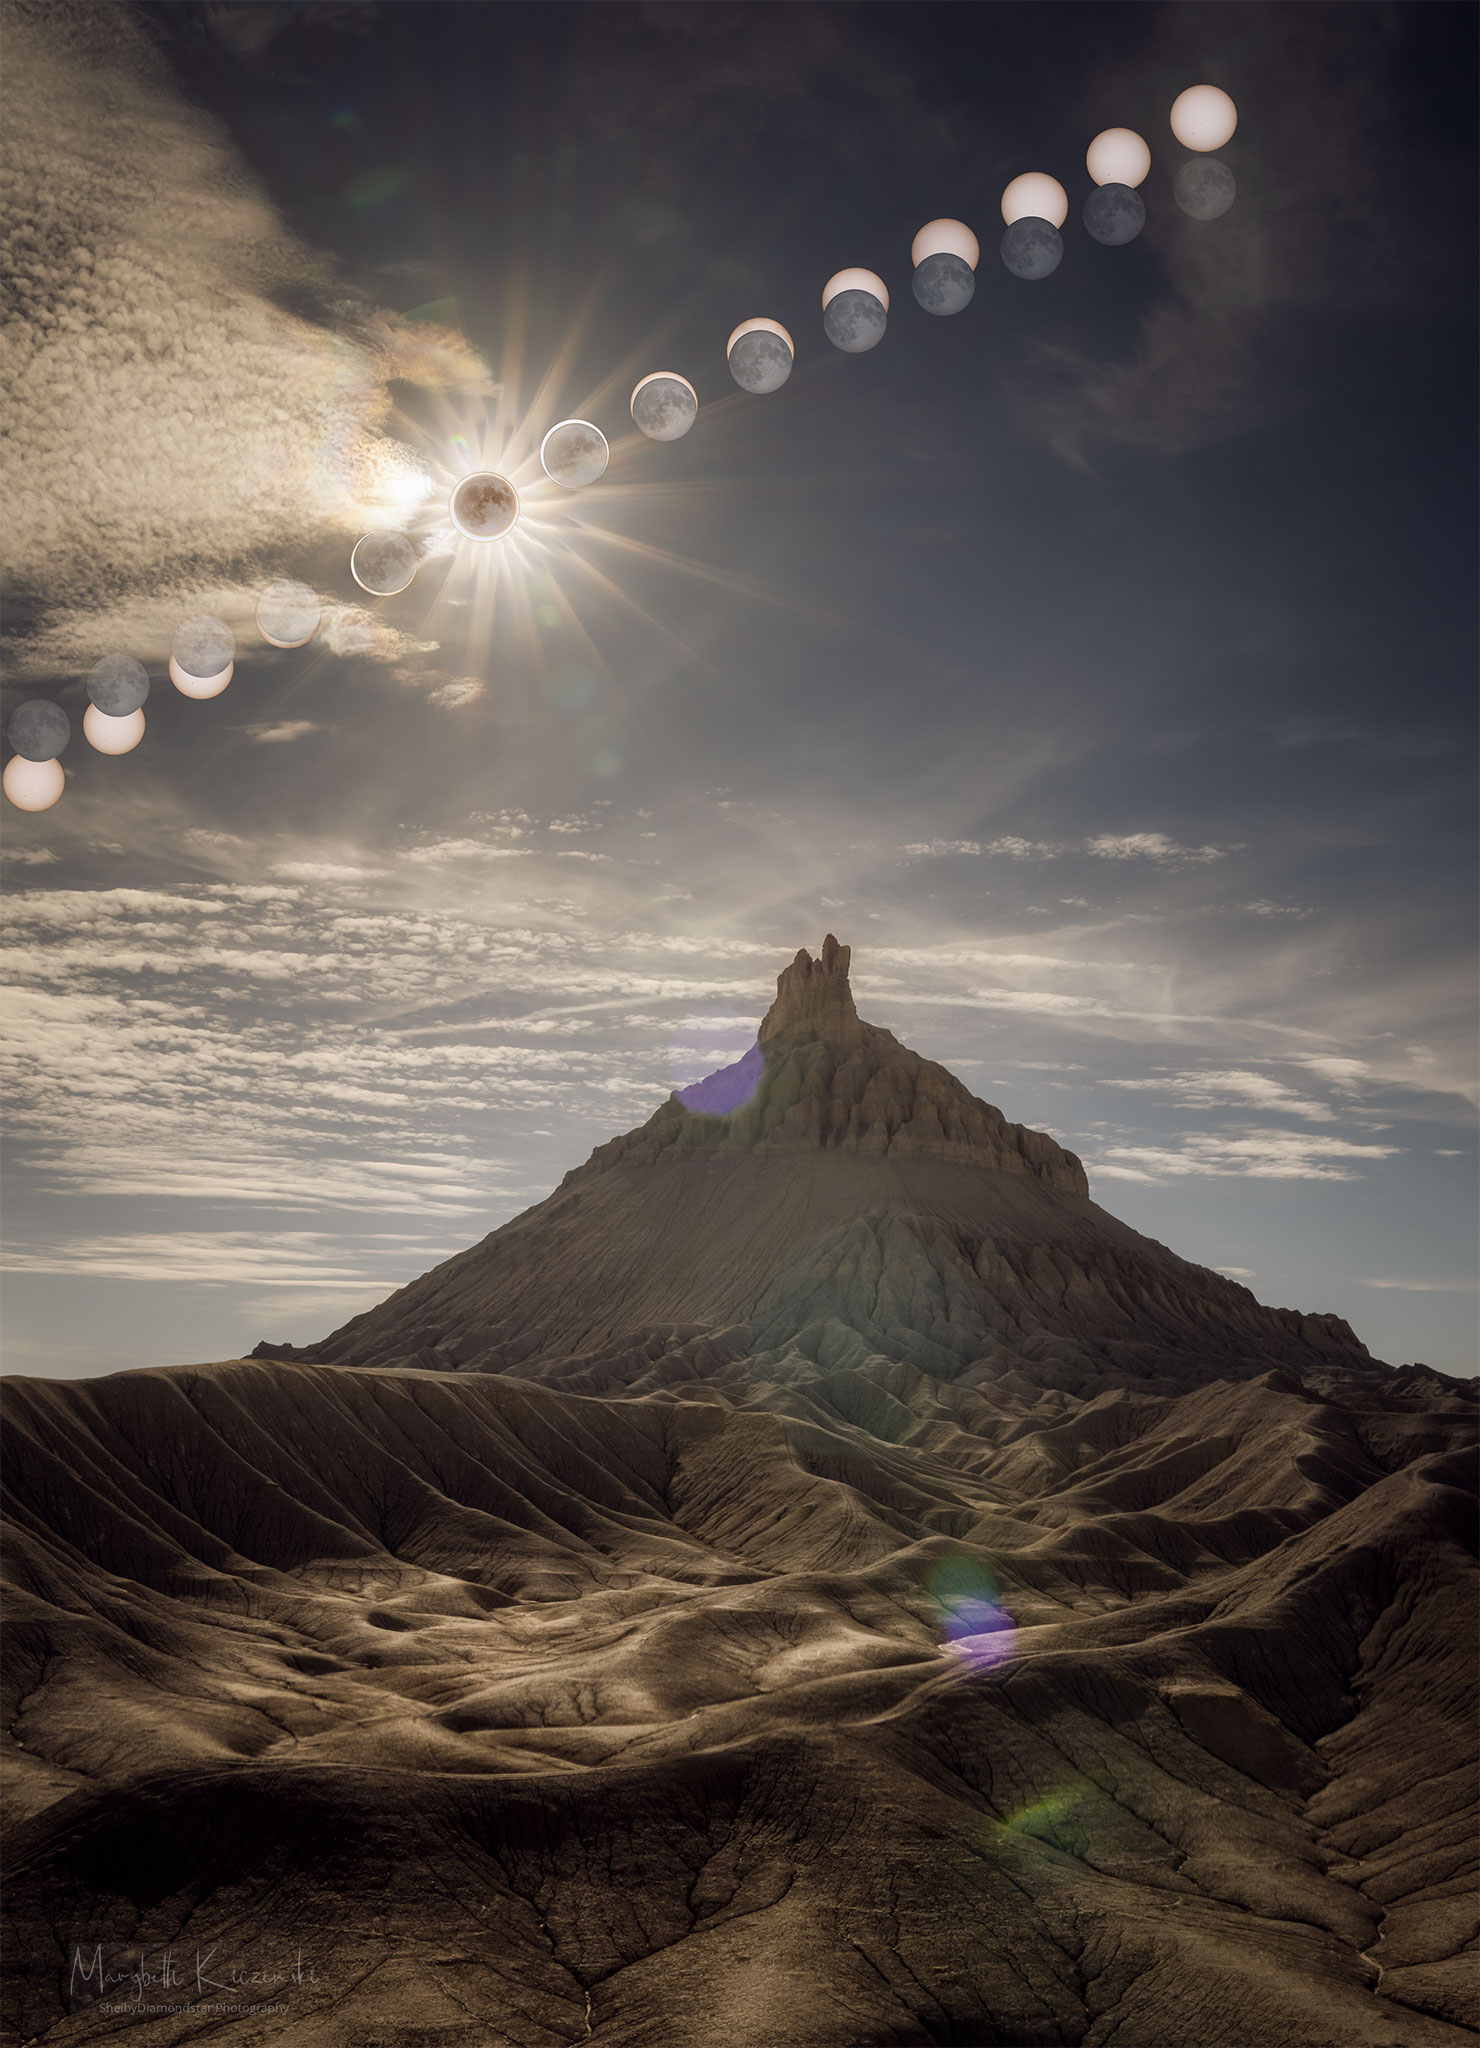 A sequence of Sun and Moon images are shown behind a
scenic foreground that features the large Factory Butte.
The foreground was taken during the maximum part of the 
annular eclipse and seems somehow oddly lit. 
Więcej szczegółowych informacji w opisie poniżej.